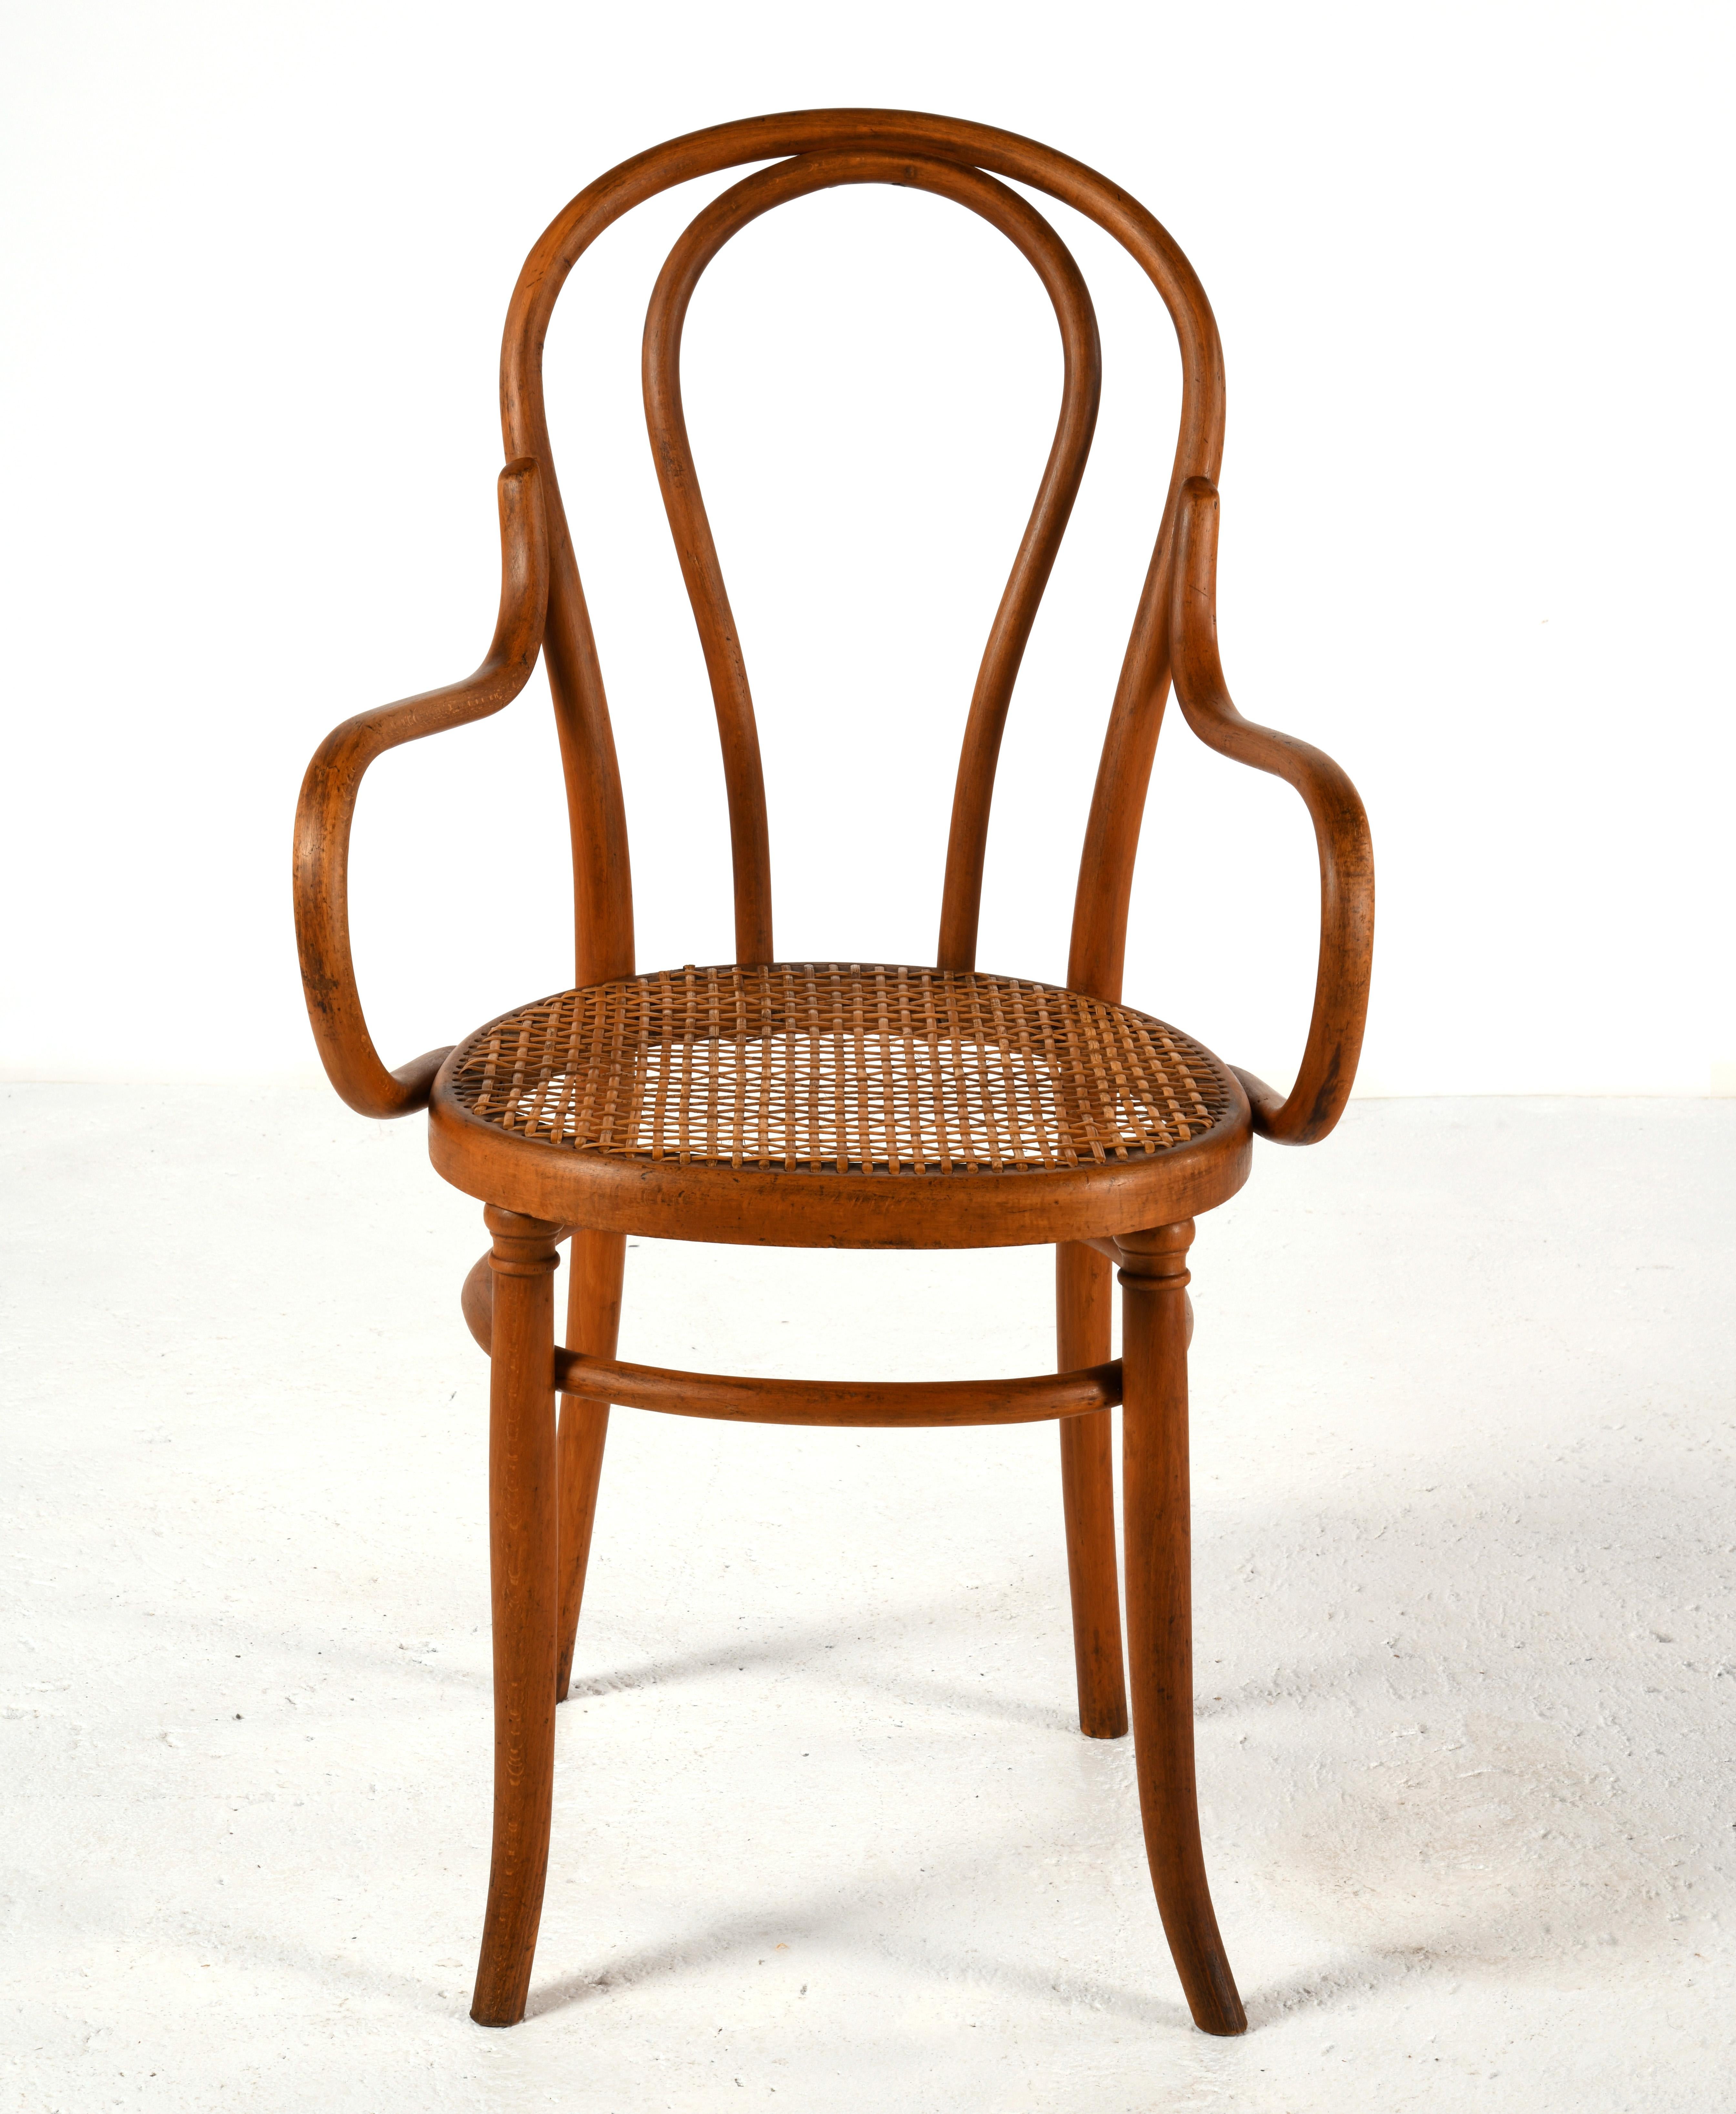 Bentwood armchair no. 18 produced by the Fischel company in Niemes (Bohemia) between 1890 and 1910. The wood is in good condition, as is the canework, which is very different from the usual canework on this type of seat. The tops of the front legs